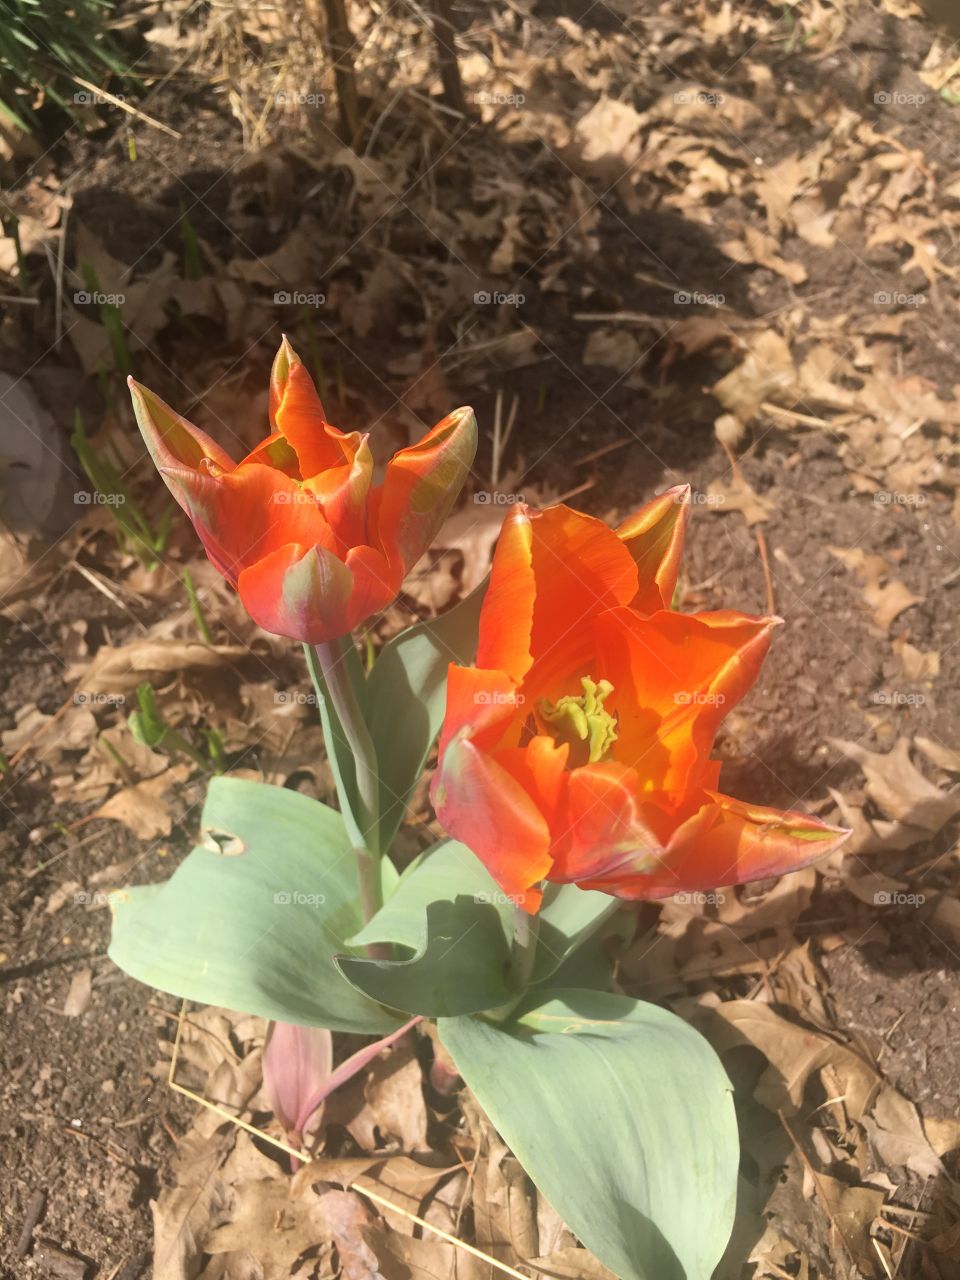 orange and yellow opened tulips with dirt background